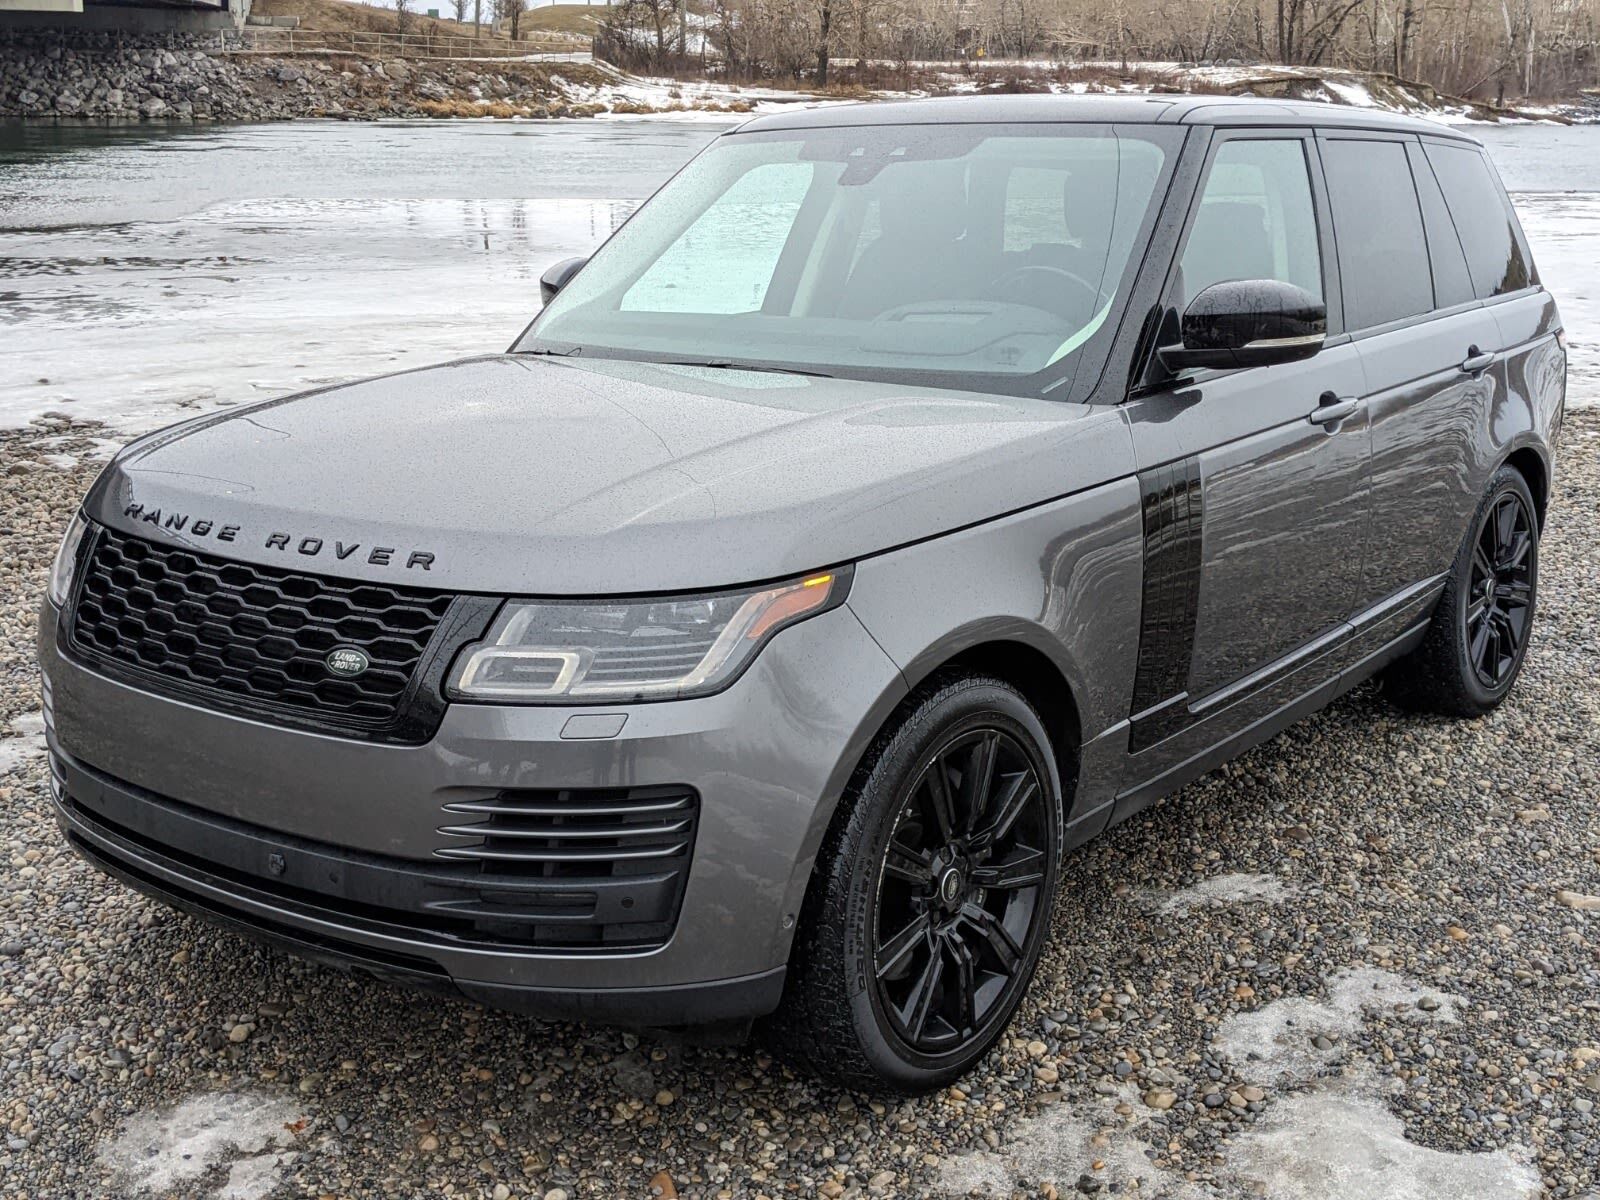 2018 Land Rover Range Rover V8 Supercharged - Locally Owned